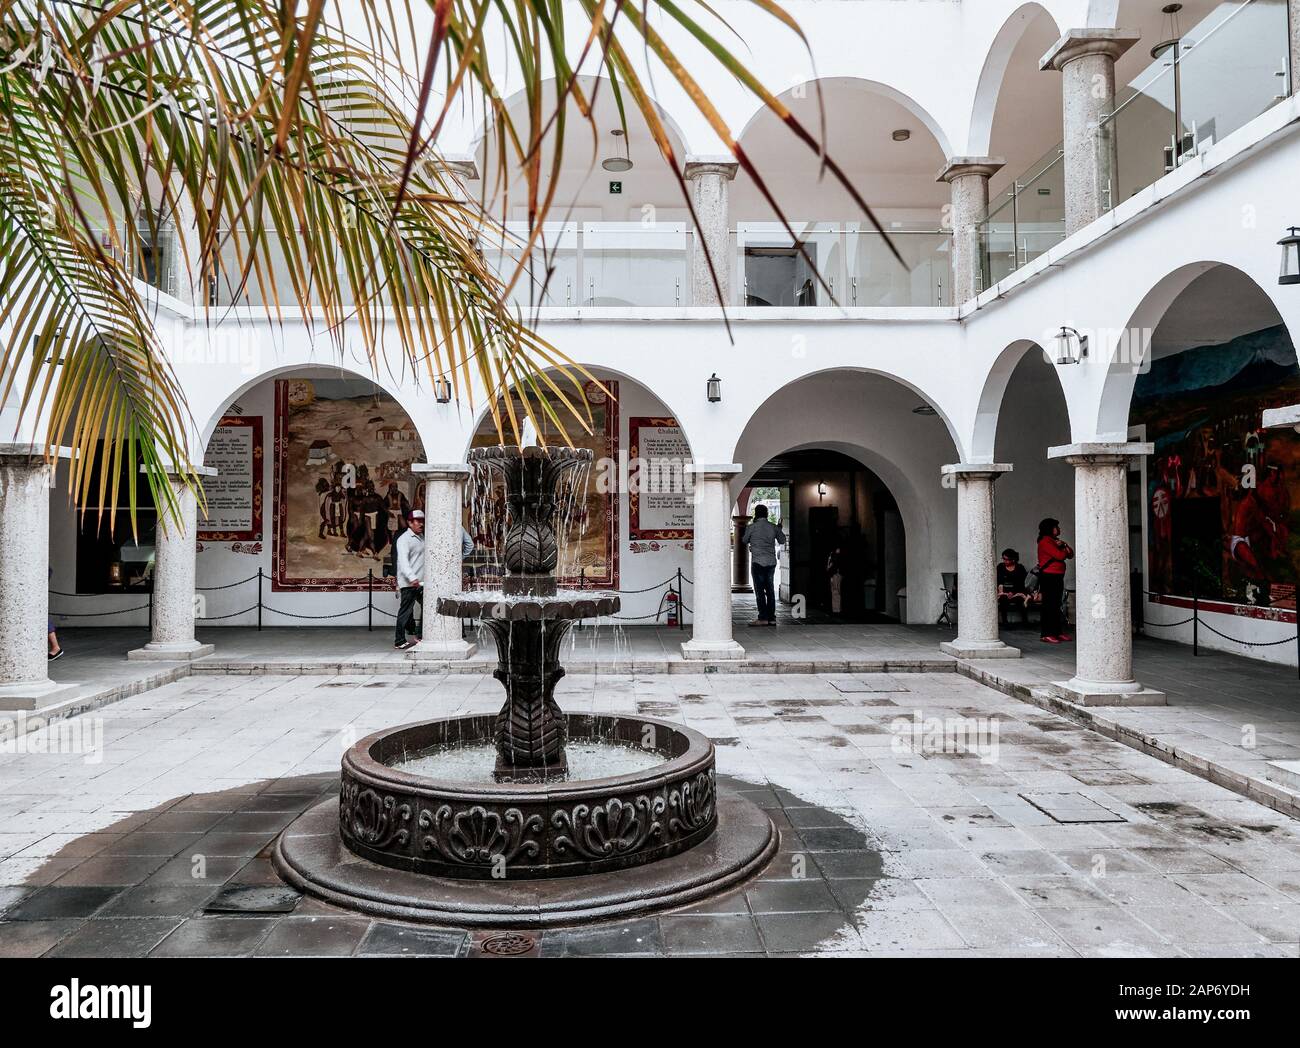 San Pedro Cholula, Mexico, October 17, 2018 - Colonnade with arches, fountain and palm tree in inner square of the town hall San Pedro Cholula. Stock Photo